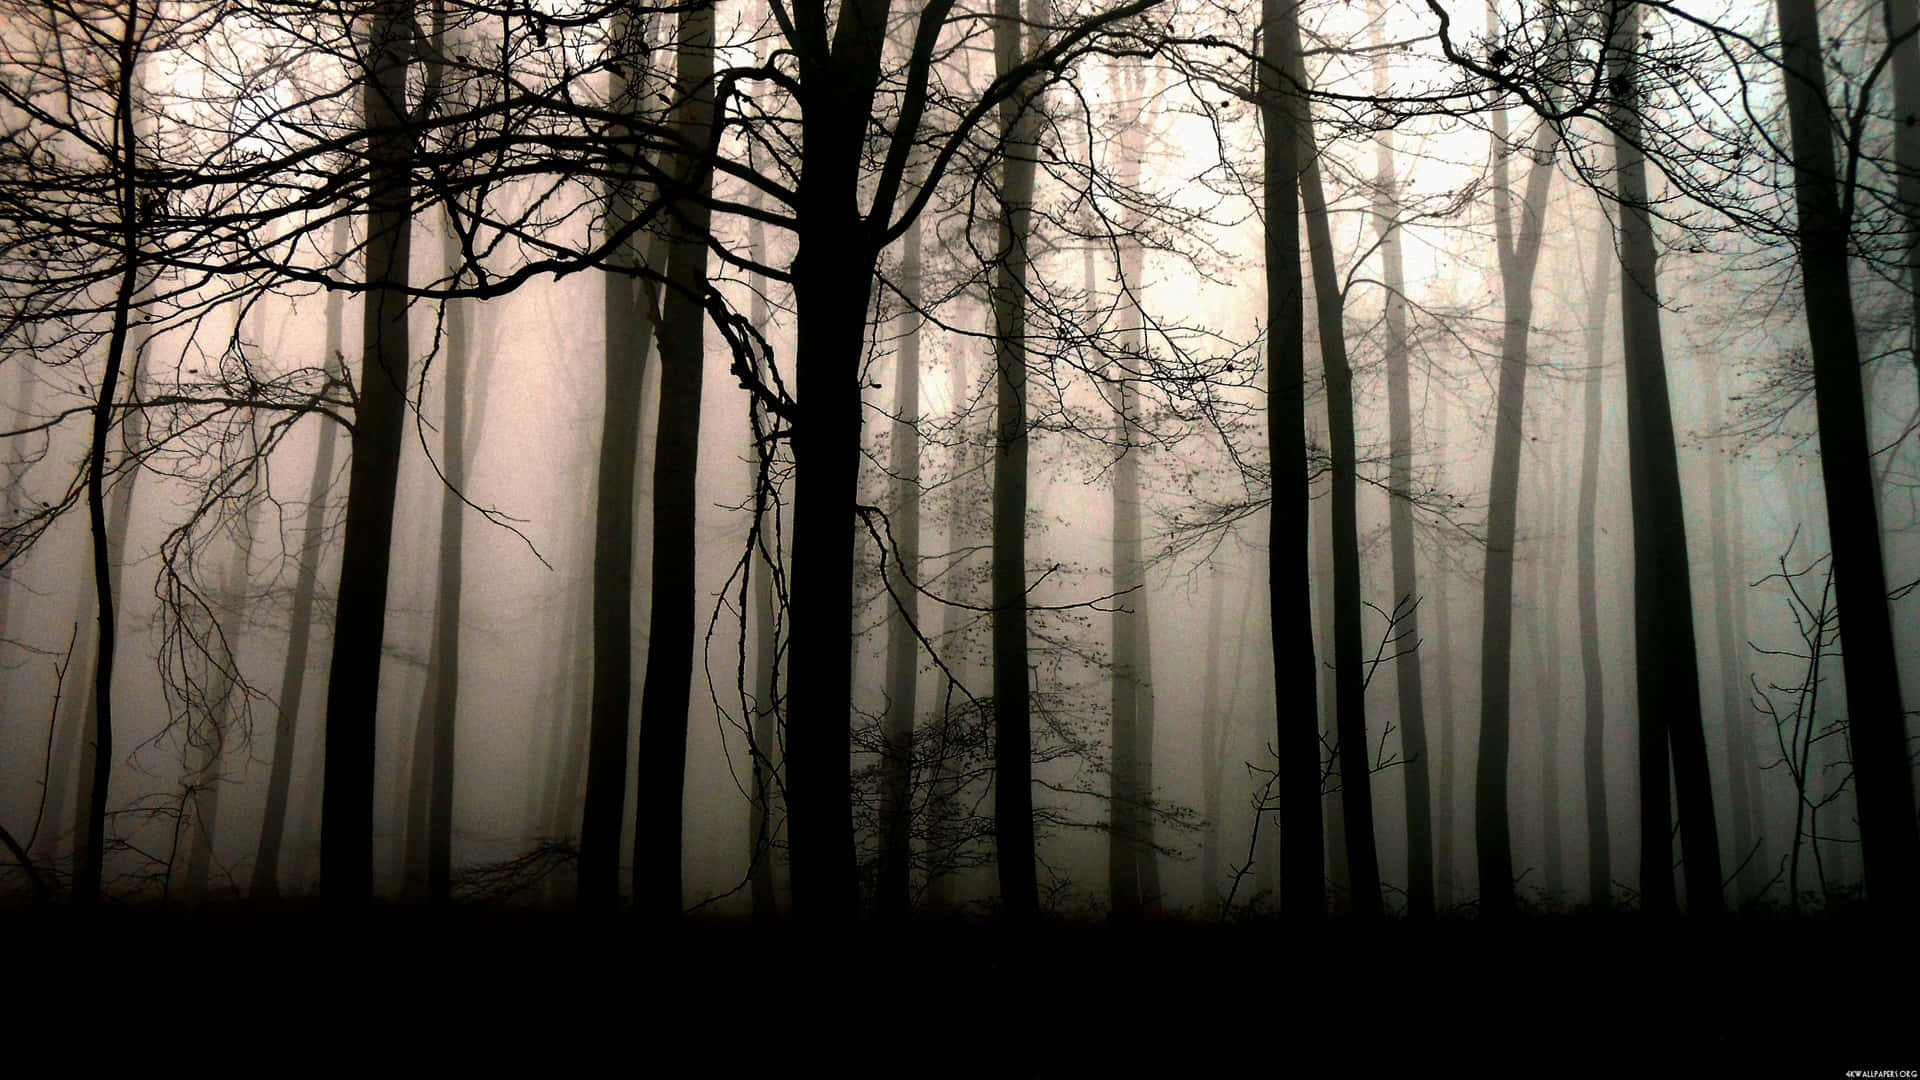 Impressive view of a dark forest shrouded in mist